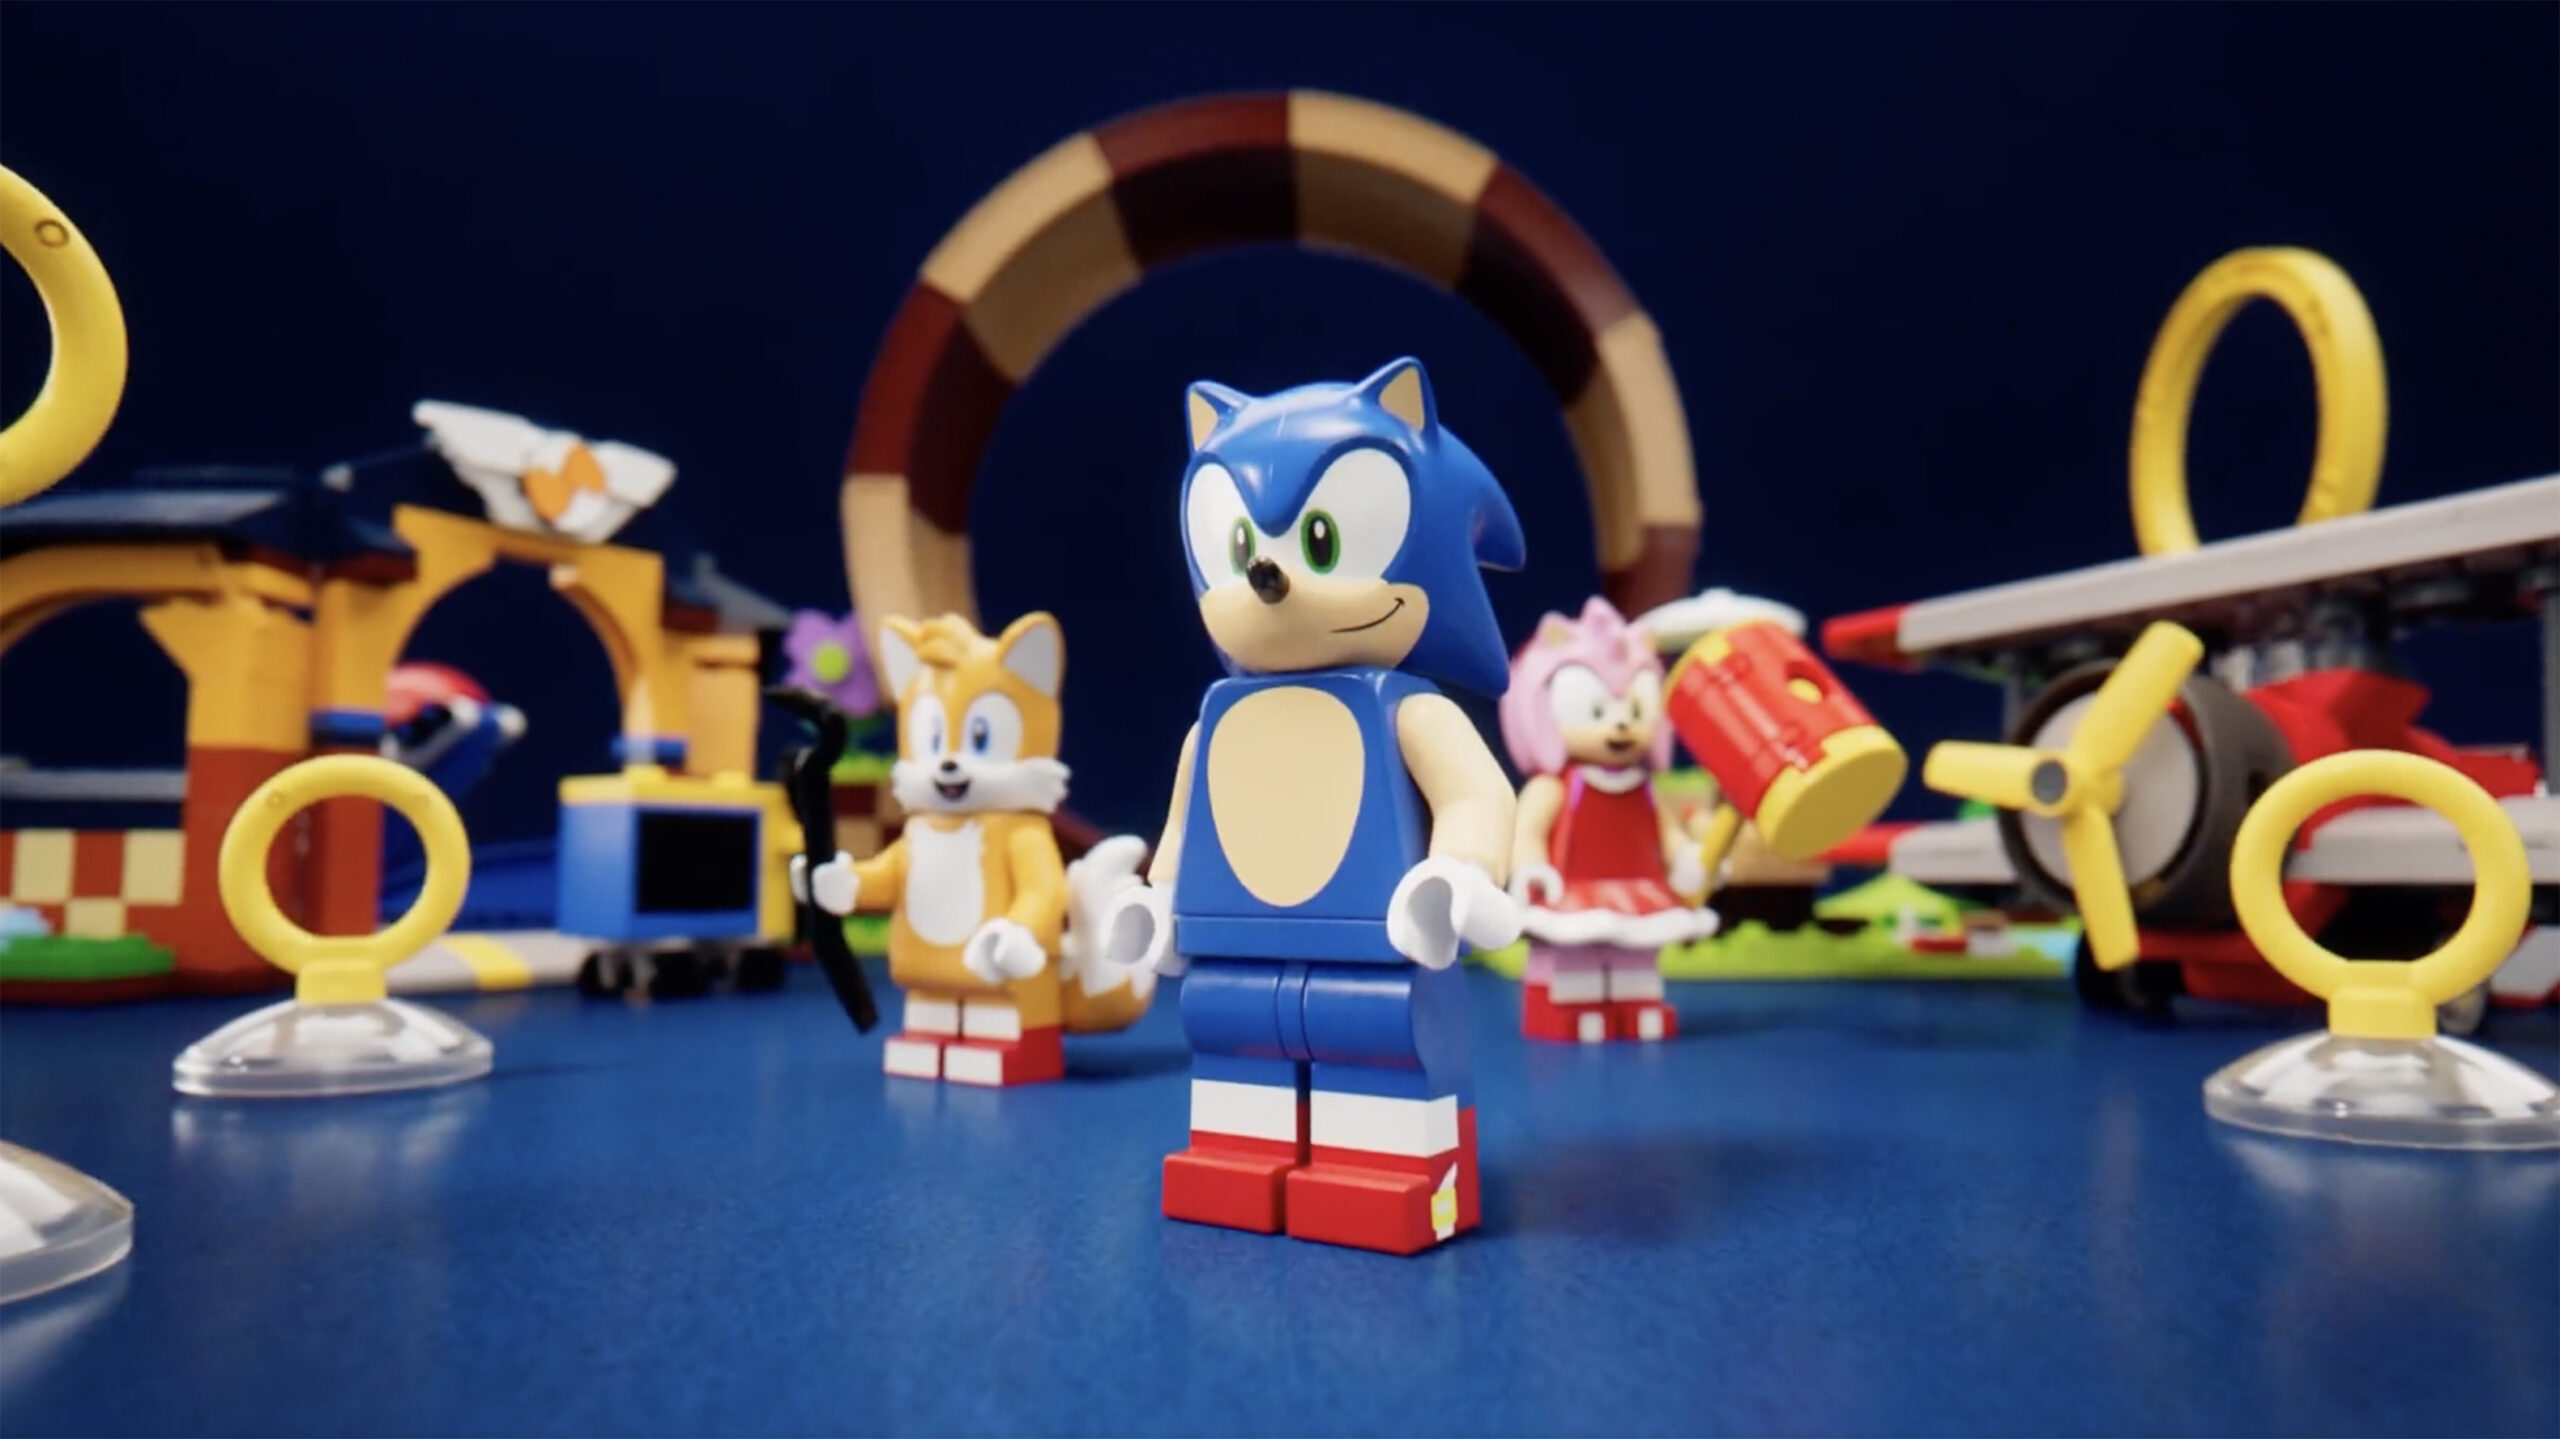 Sonic The Hedgehog Comes To Lego Dimensions On November 18, 2016